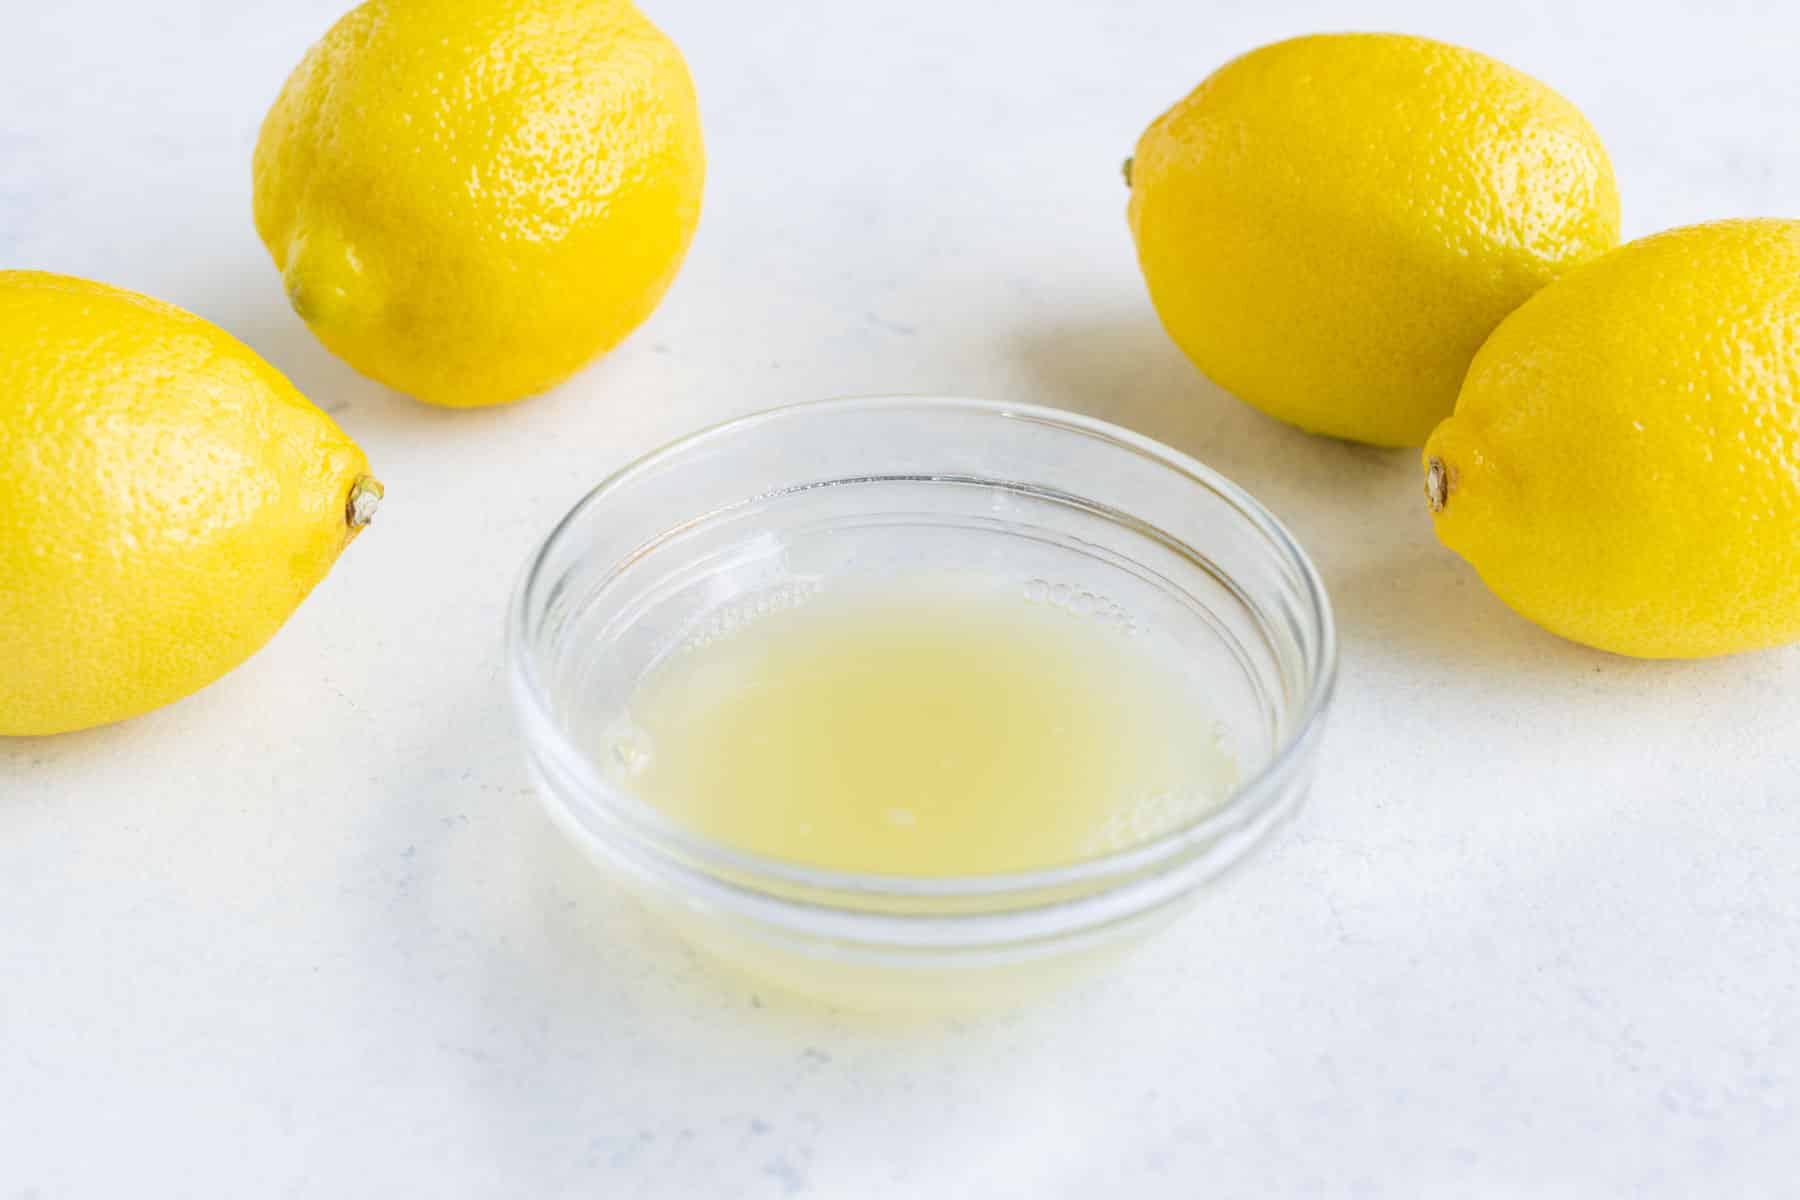 Fresh lemon juice in a small glass bowl with lemons in the background on the countertop.